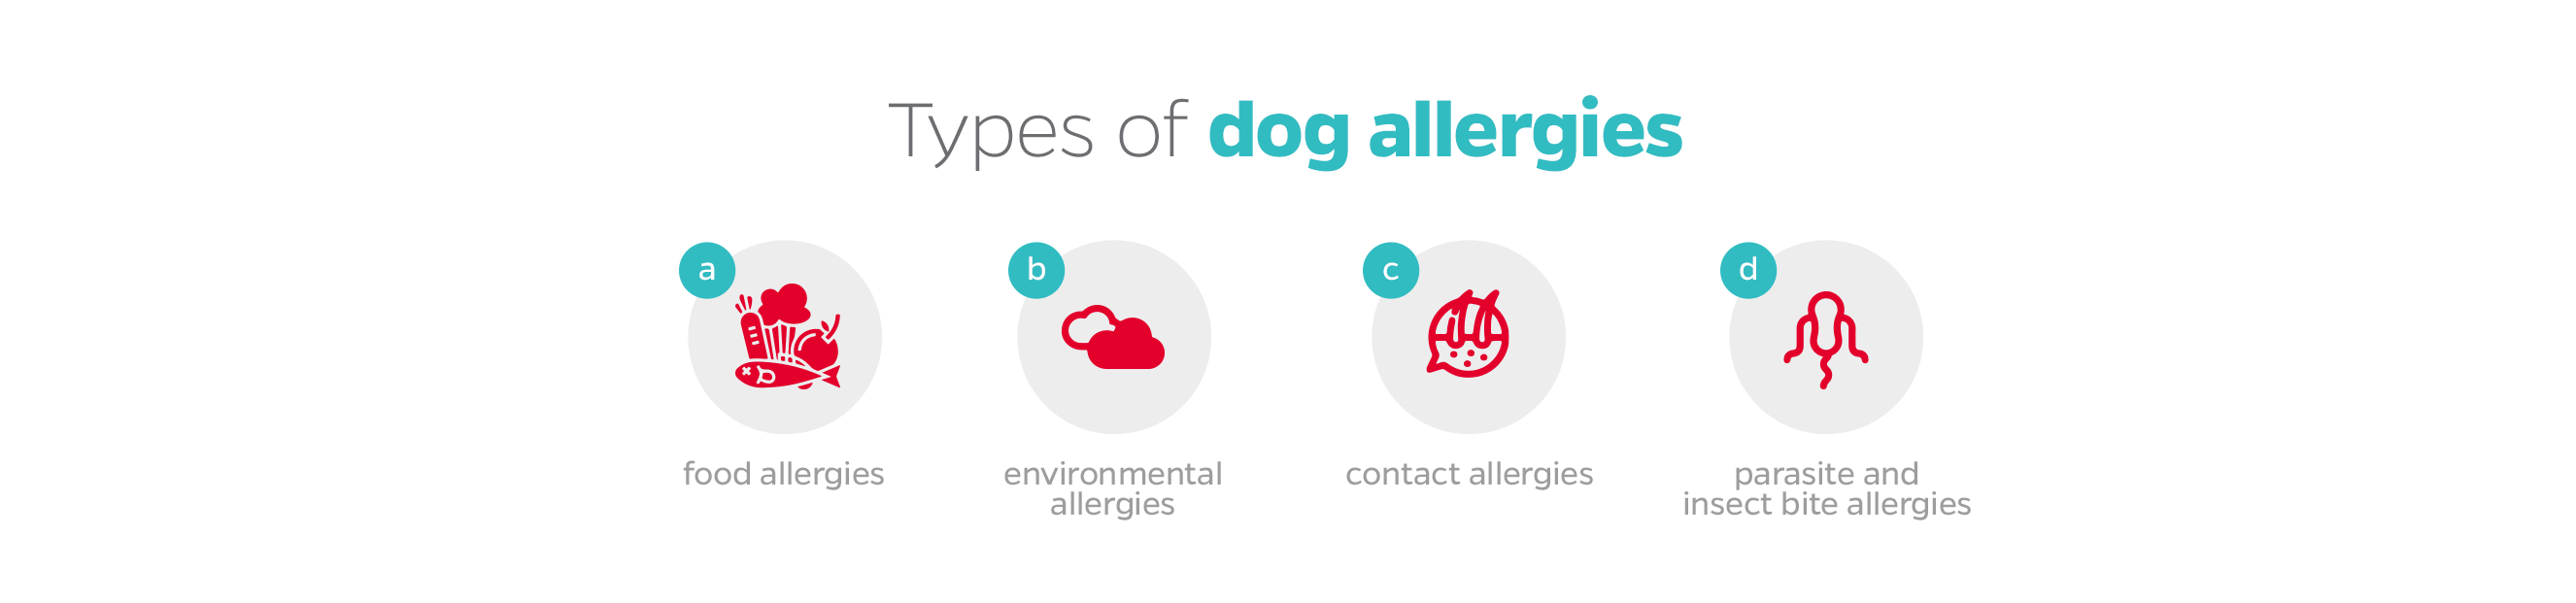 best allergy supplements for dogs, dog supplements for skin allergies